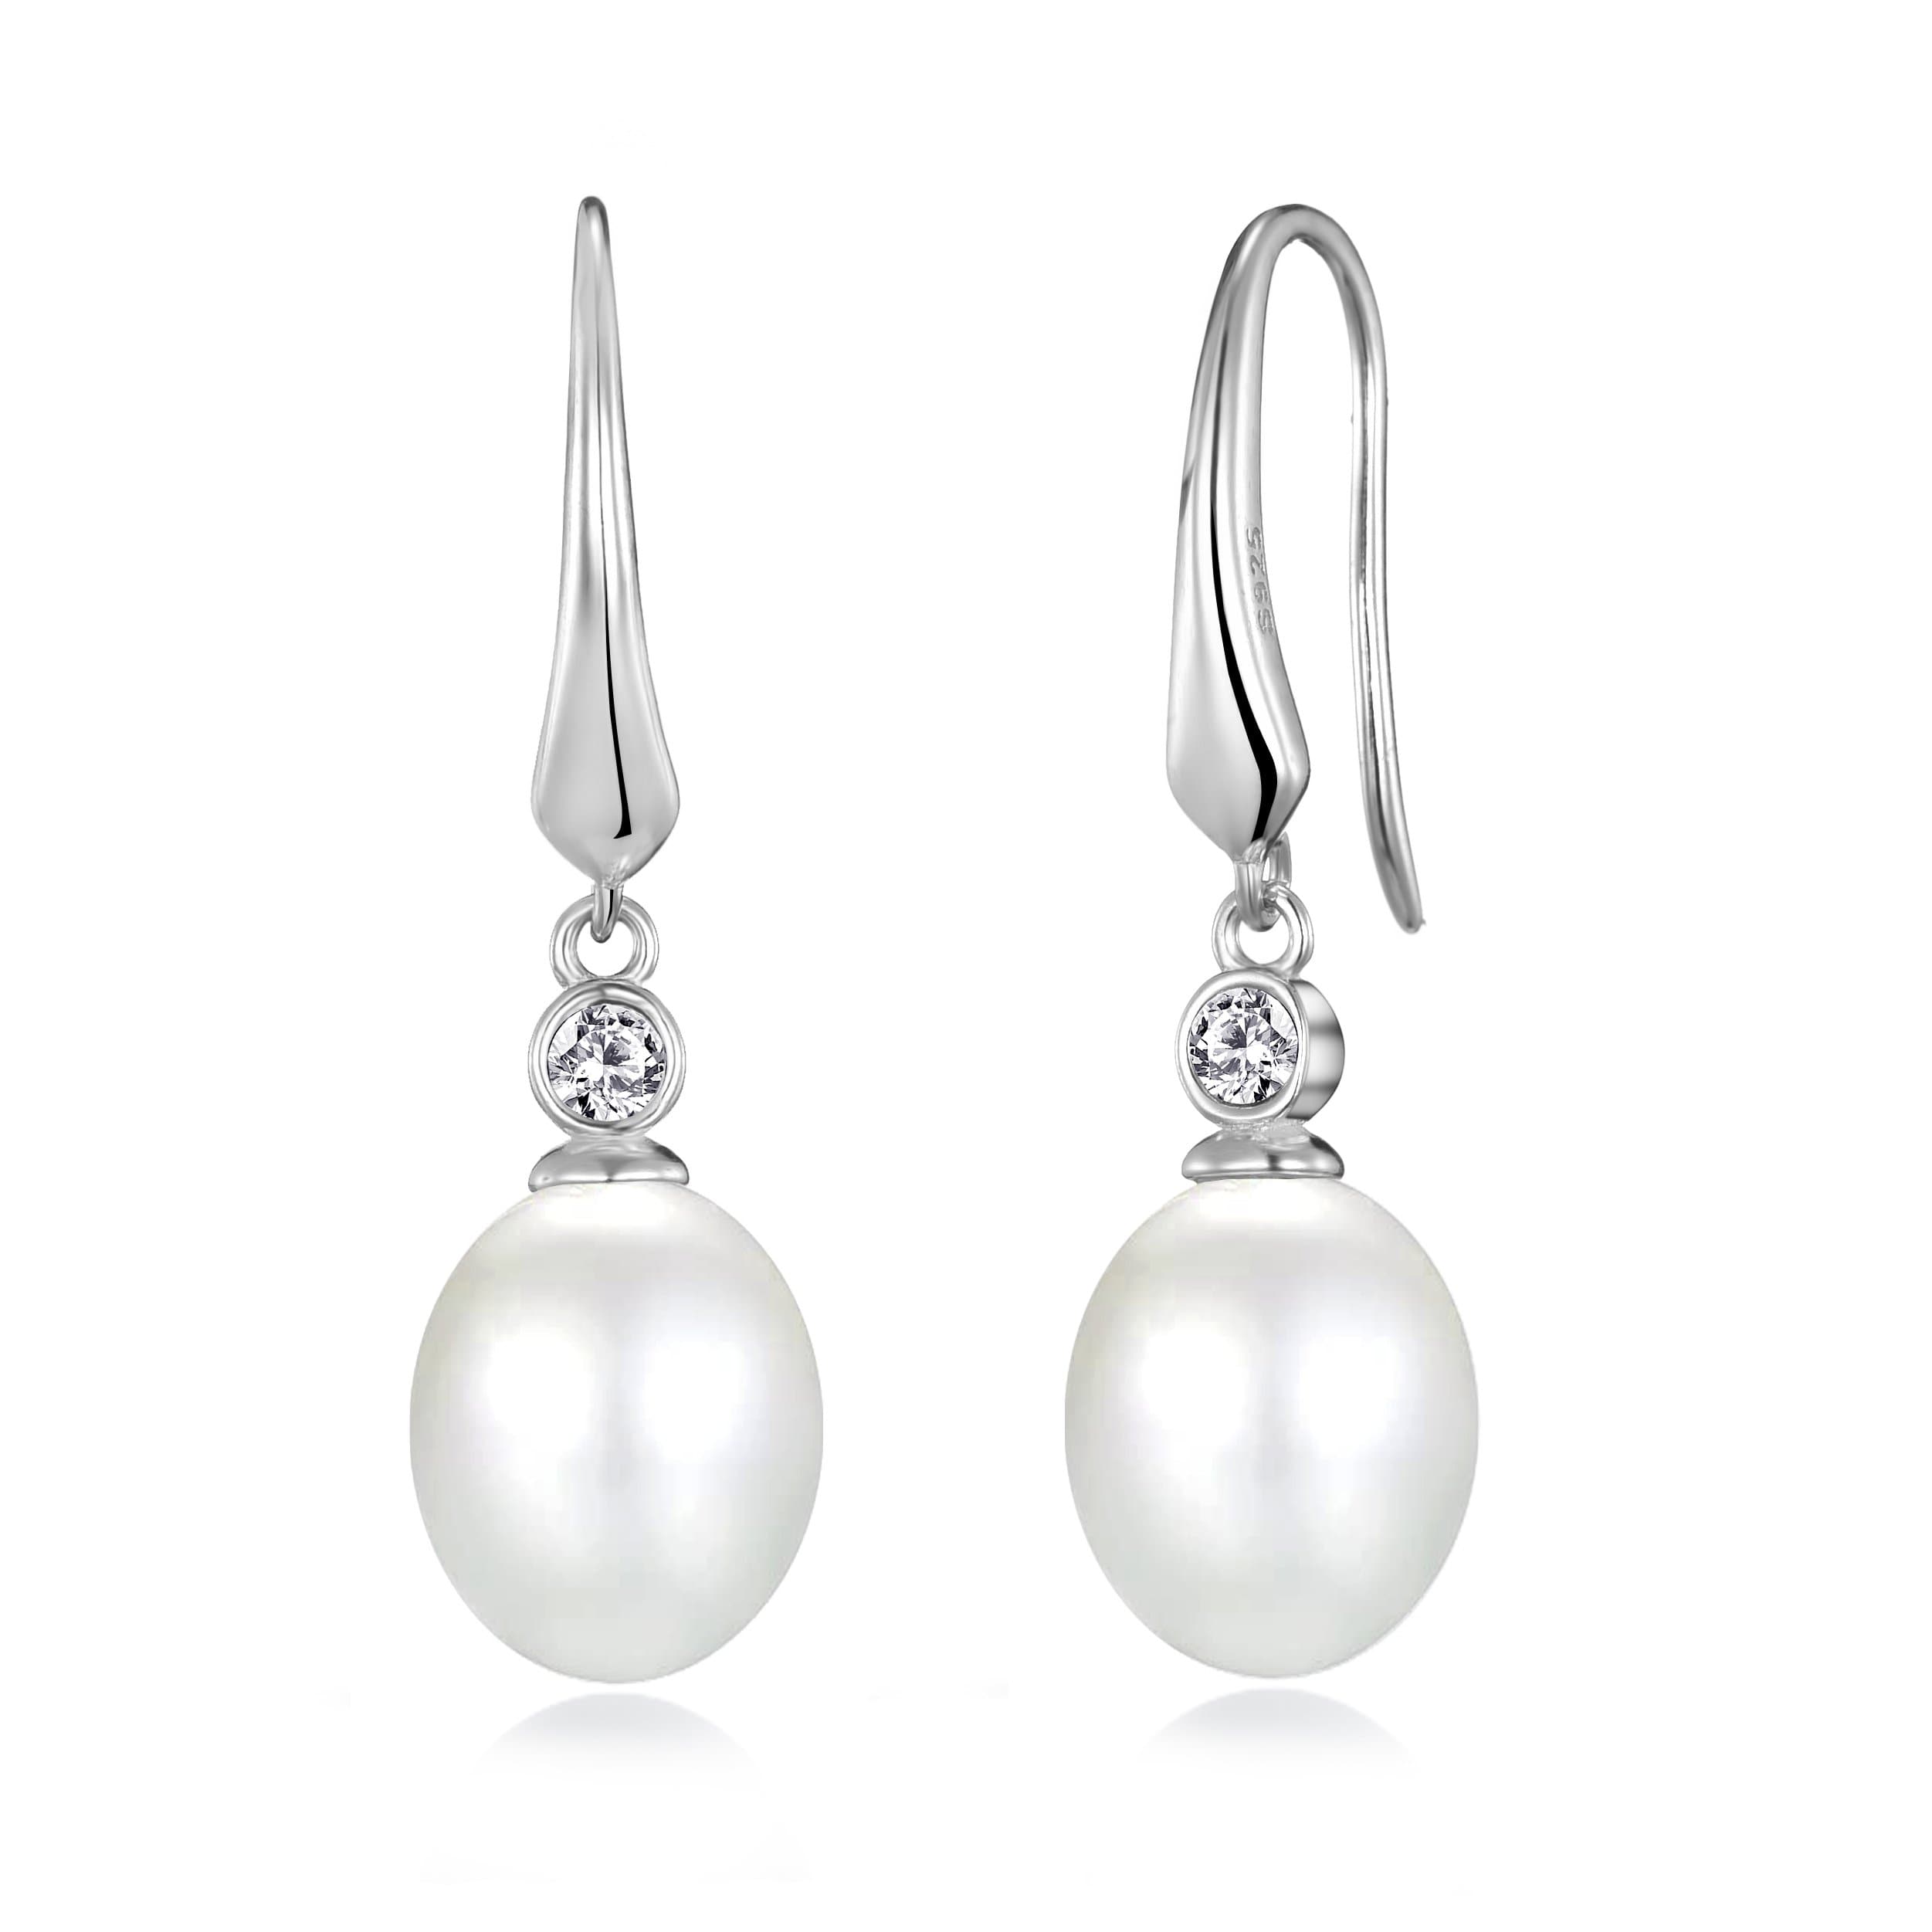 Sterling Silver White Pearl Drop Earrings Created with Zircondia® Crystals by Philip Jones Jewellery